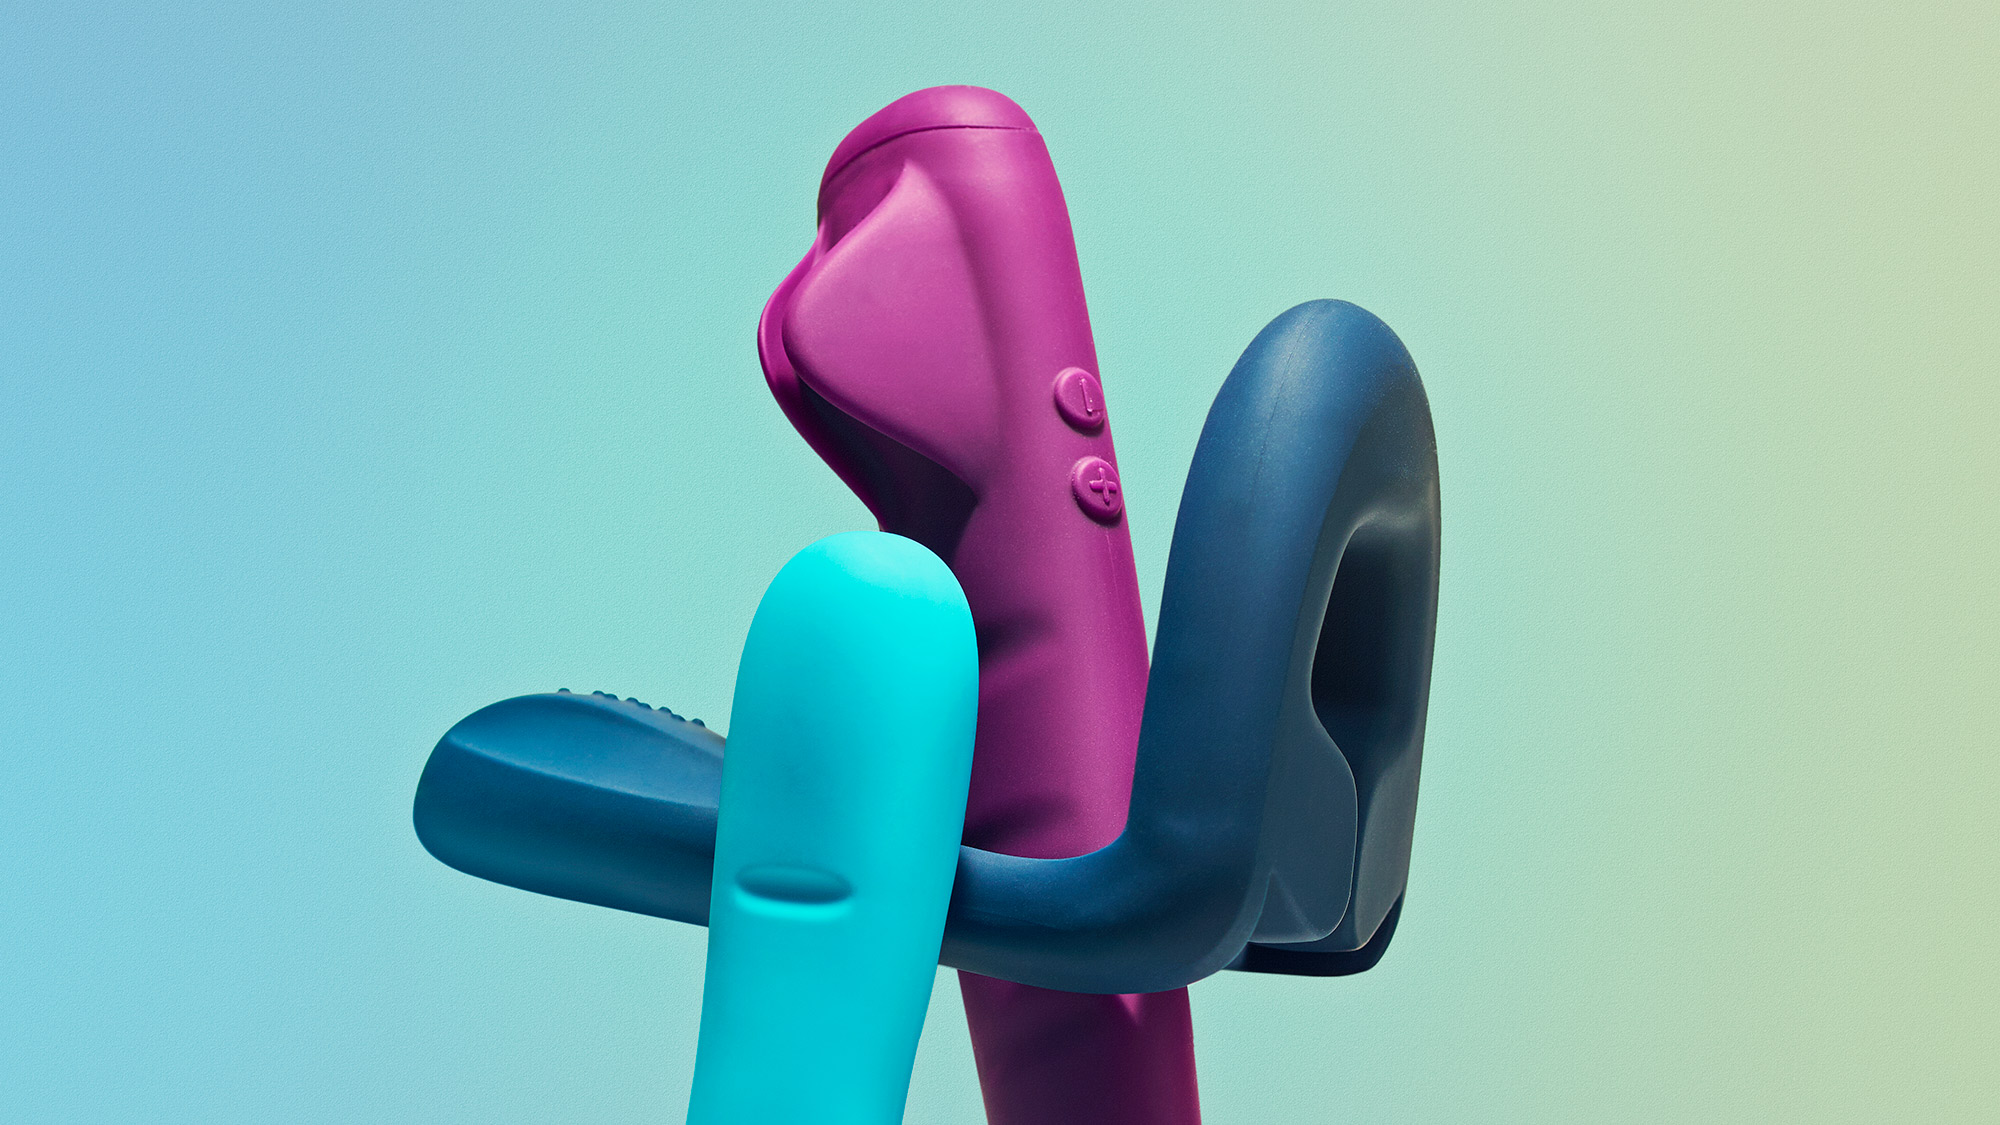 Sex toys engineered to be medical devices Popular Science pic